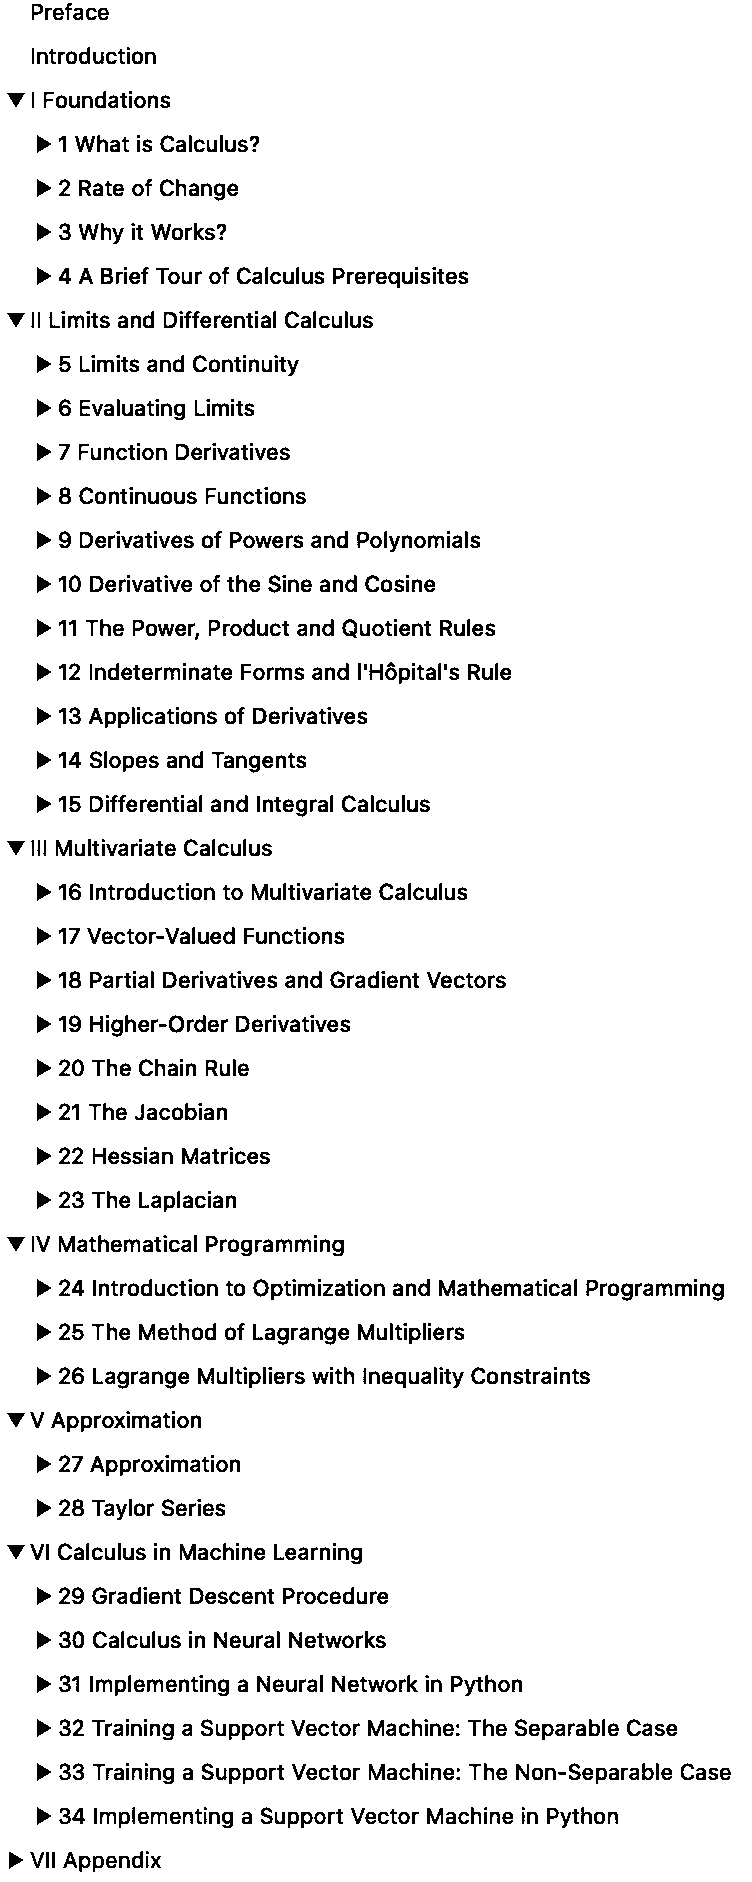 Calculus for Machine Learning Table of Contents